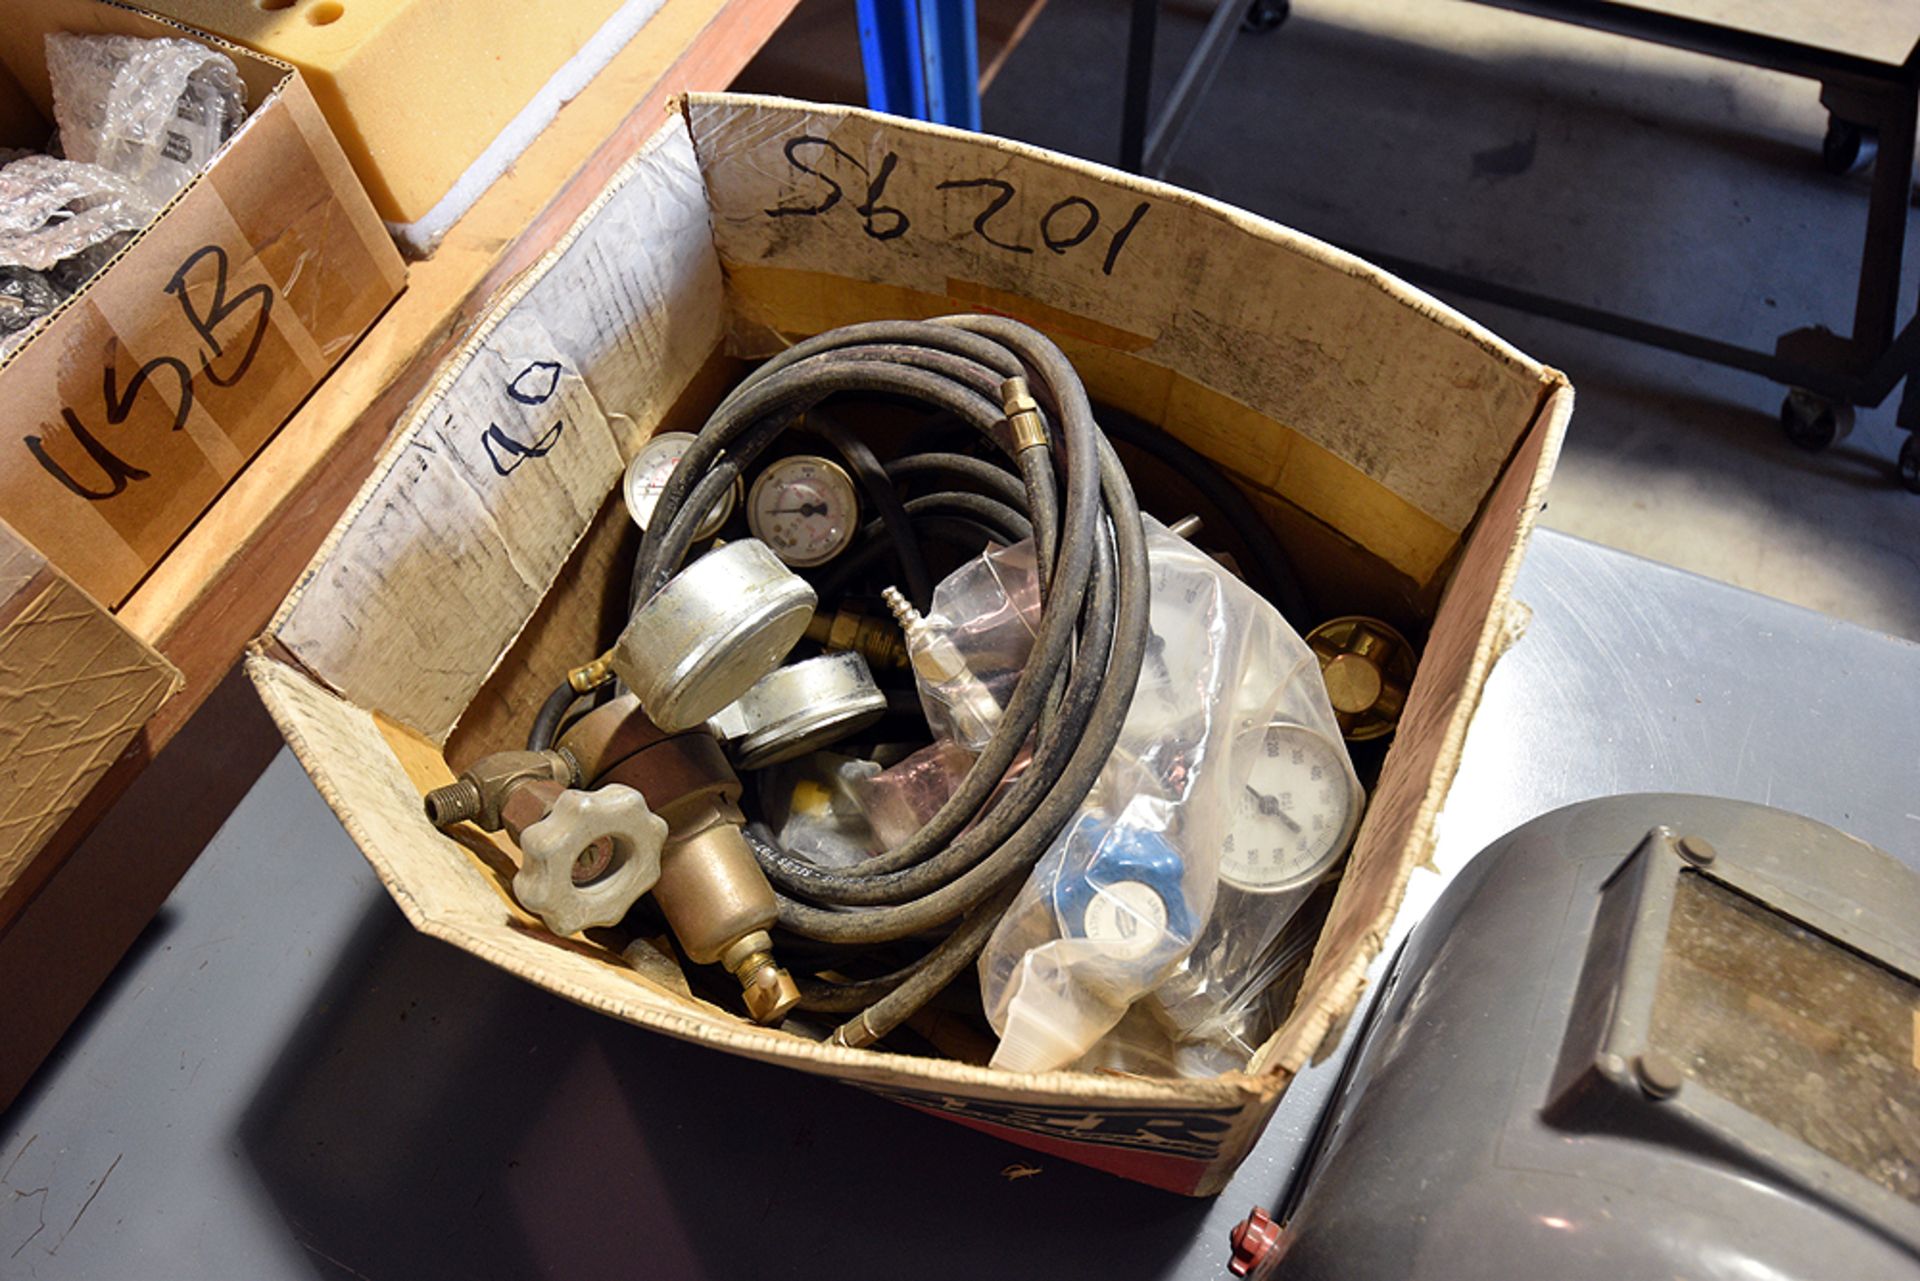 Contents of 6 tables consisting of: welding accessories, Dayton heater, Wire etc. - Image 8 of 8